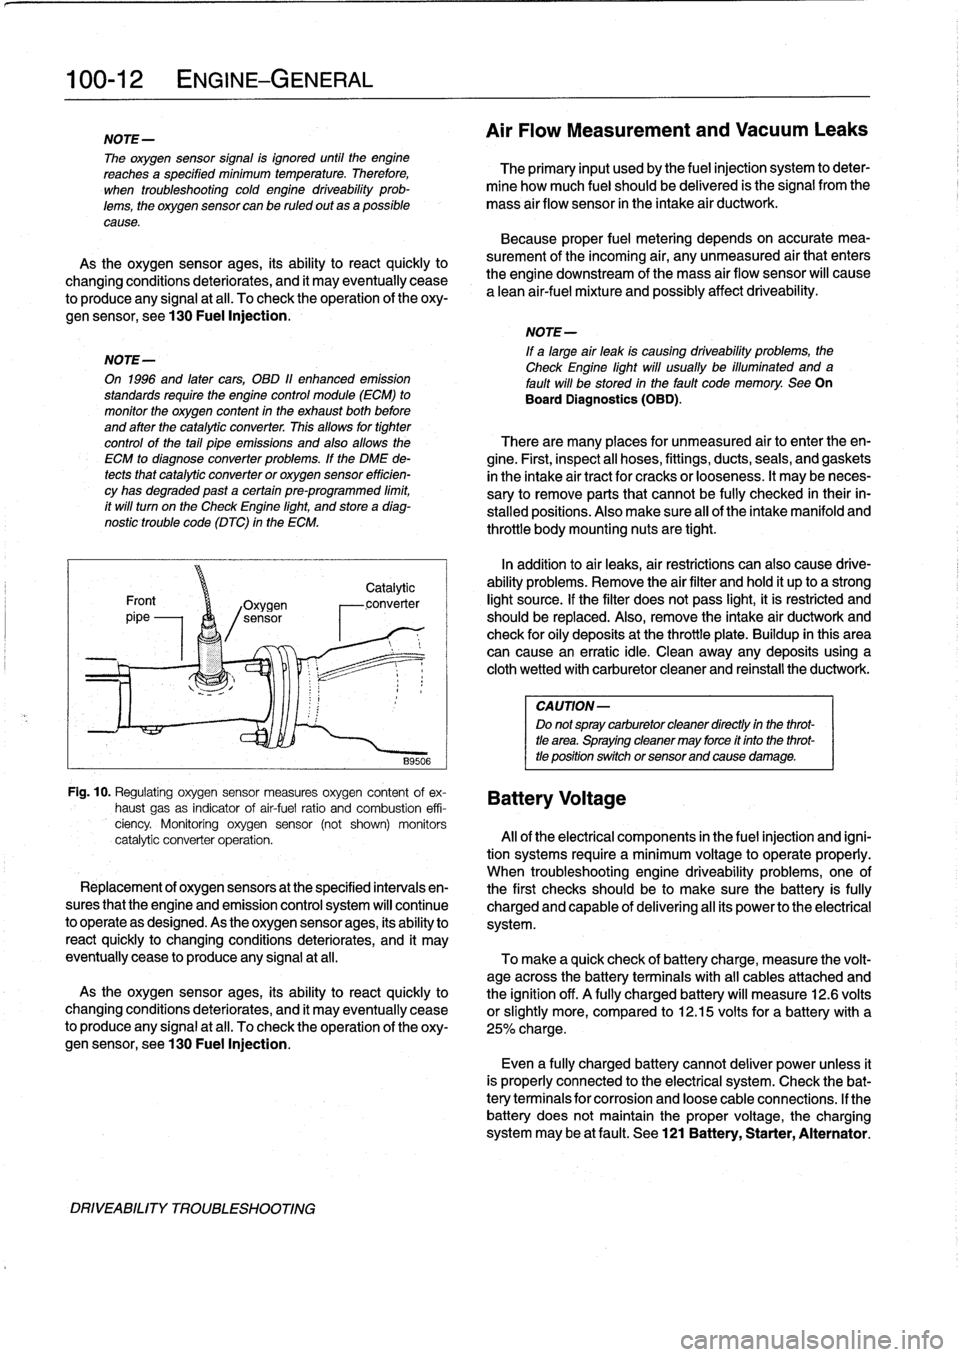 BMW 325i 1994 E36 Workshop Manual 
100-
1
2
ENGINE-GENERAL

NOTE-

The
oxygen
sensor
signal
is
ignored
until
the
engine
reachesa
specified
minimum
temperature
.
Therefore,

	

The
primary
input
usedby
the
fuel
injection
system
to
dete